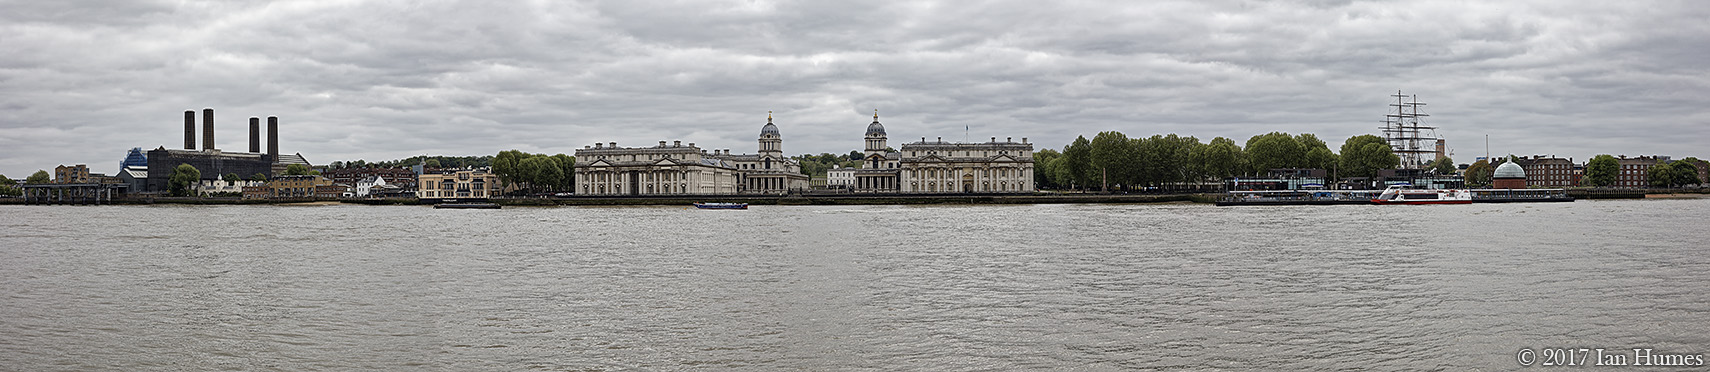 Wide-angle stitched panoramic photograph from Island Gardens of Greenwich Maritime World Heritage Site. LVMF 24a2 - Island Gardens